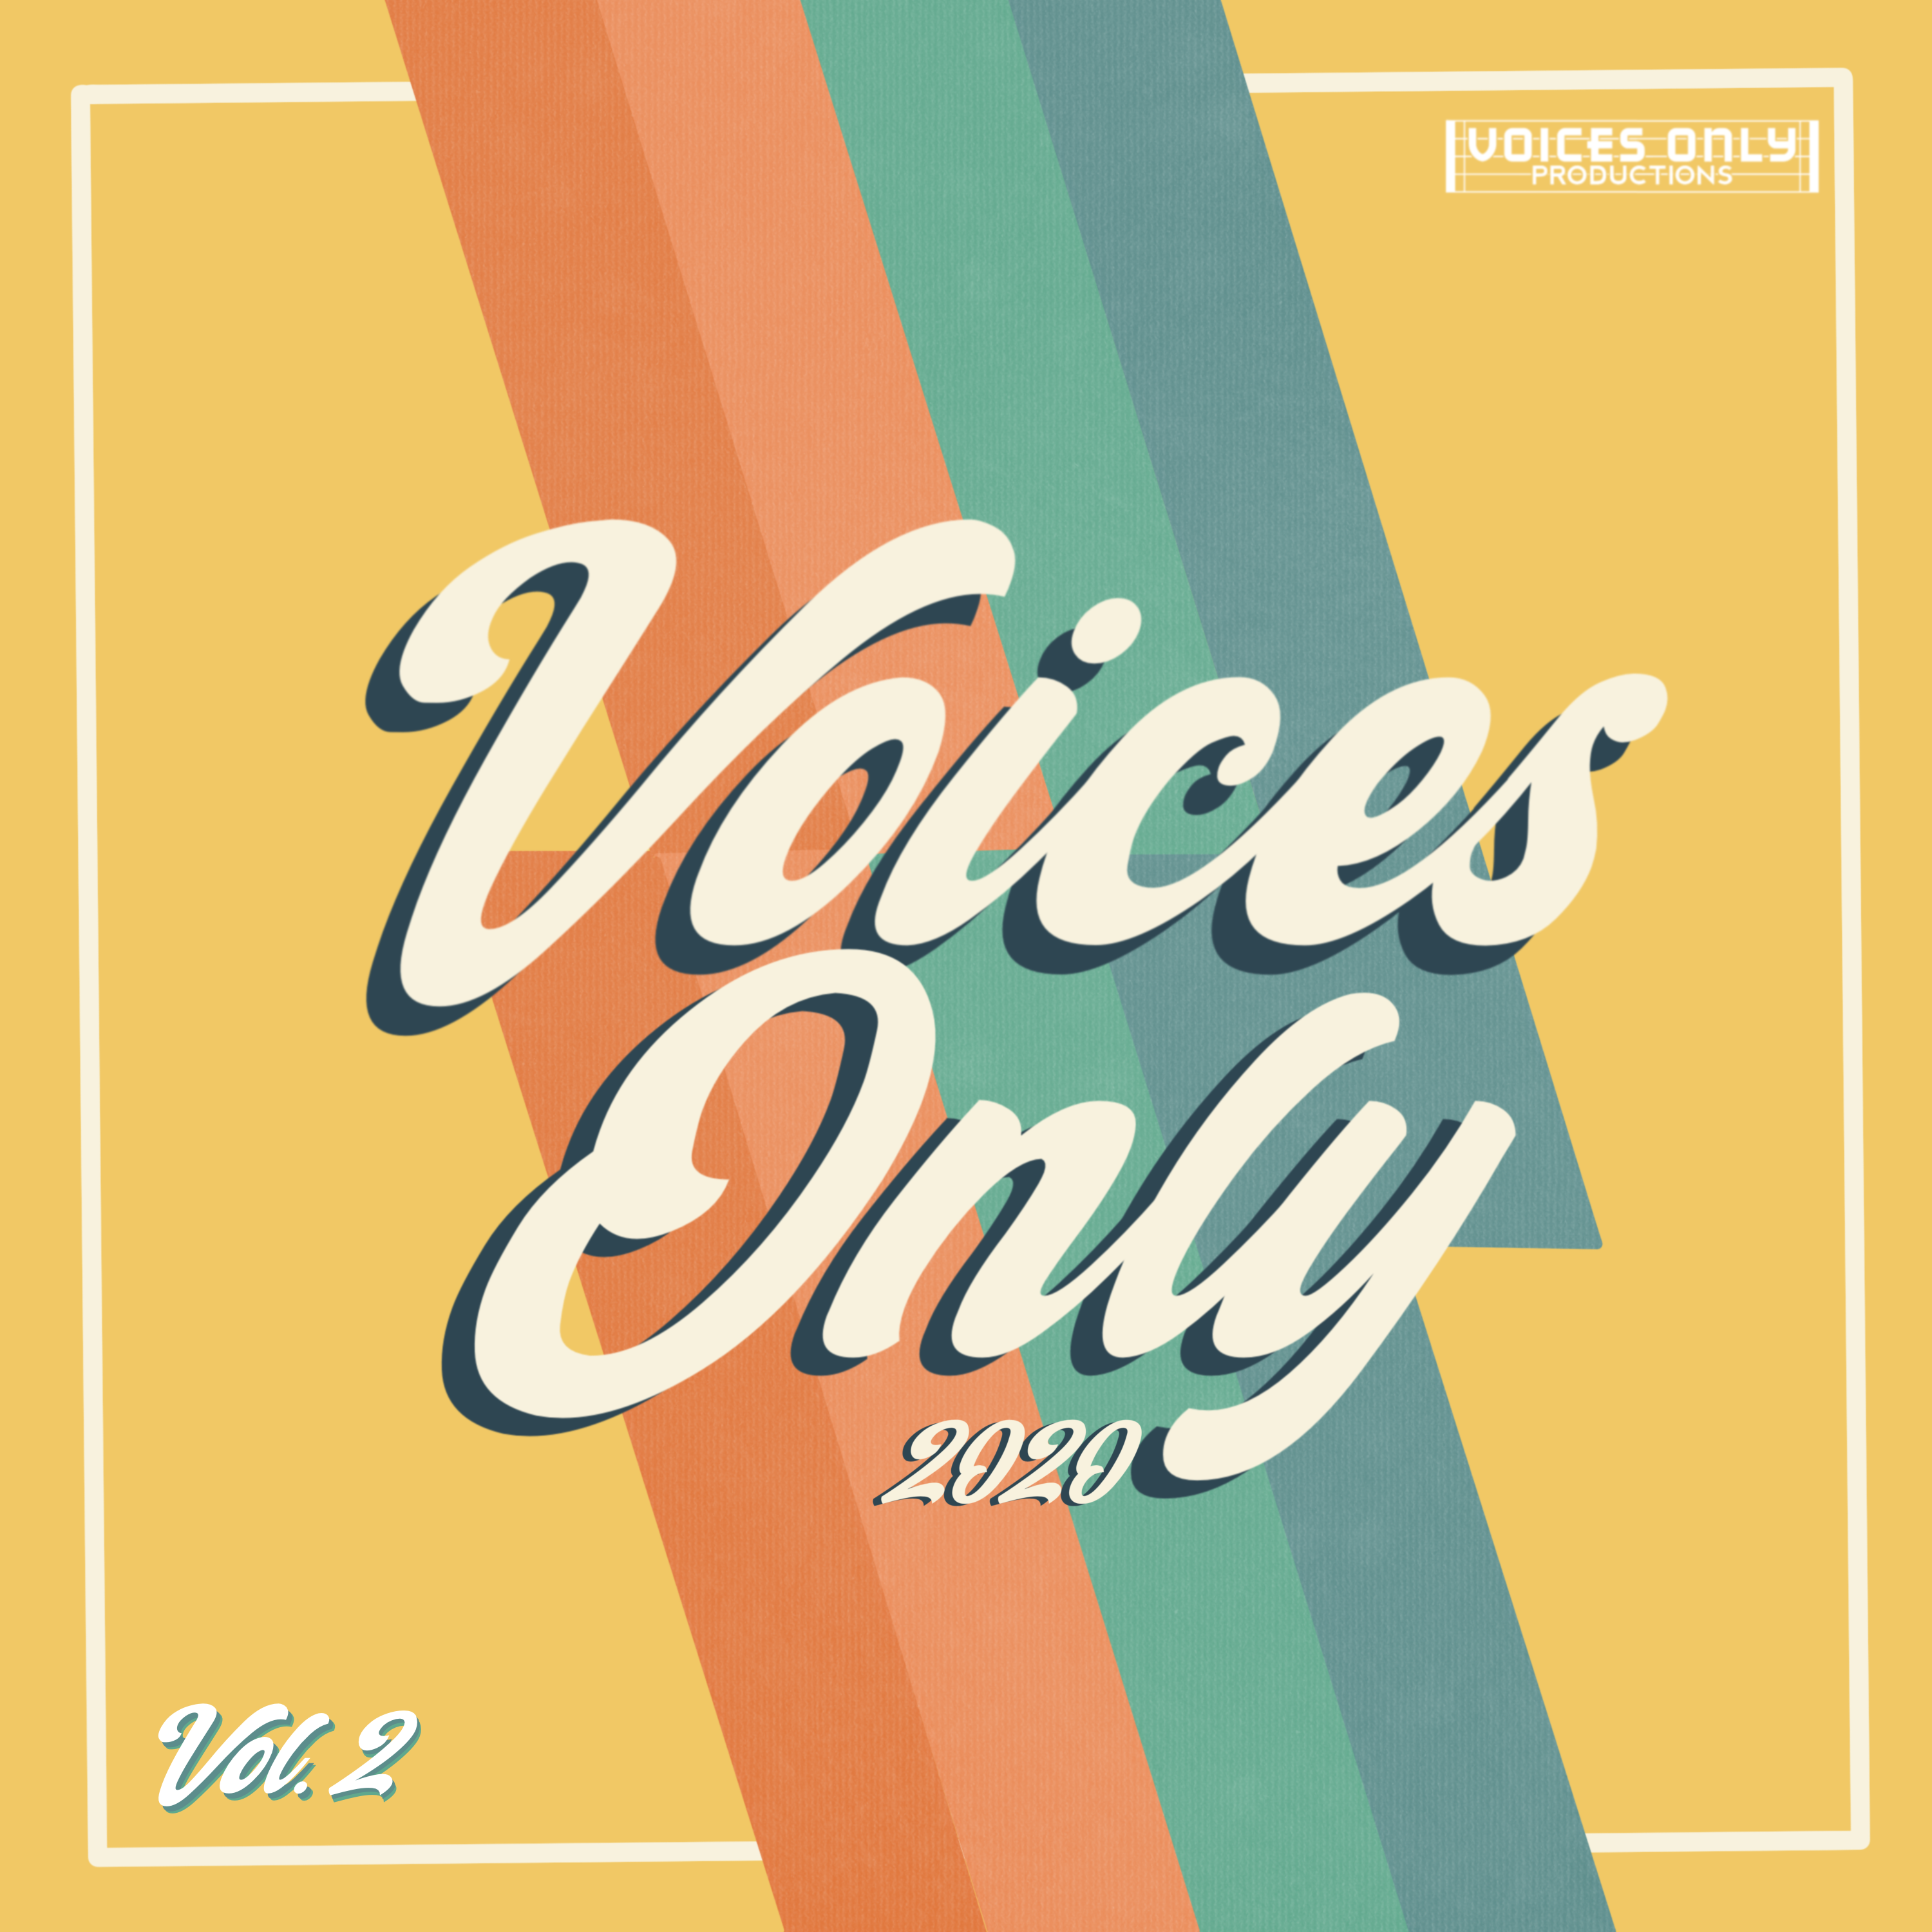 Voices Only 2020 - Volume 2